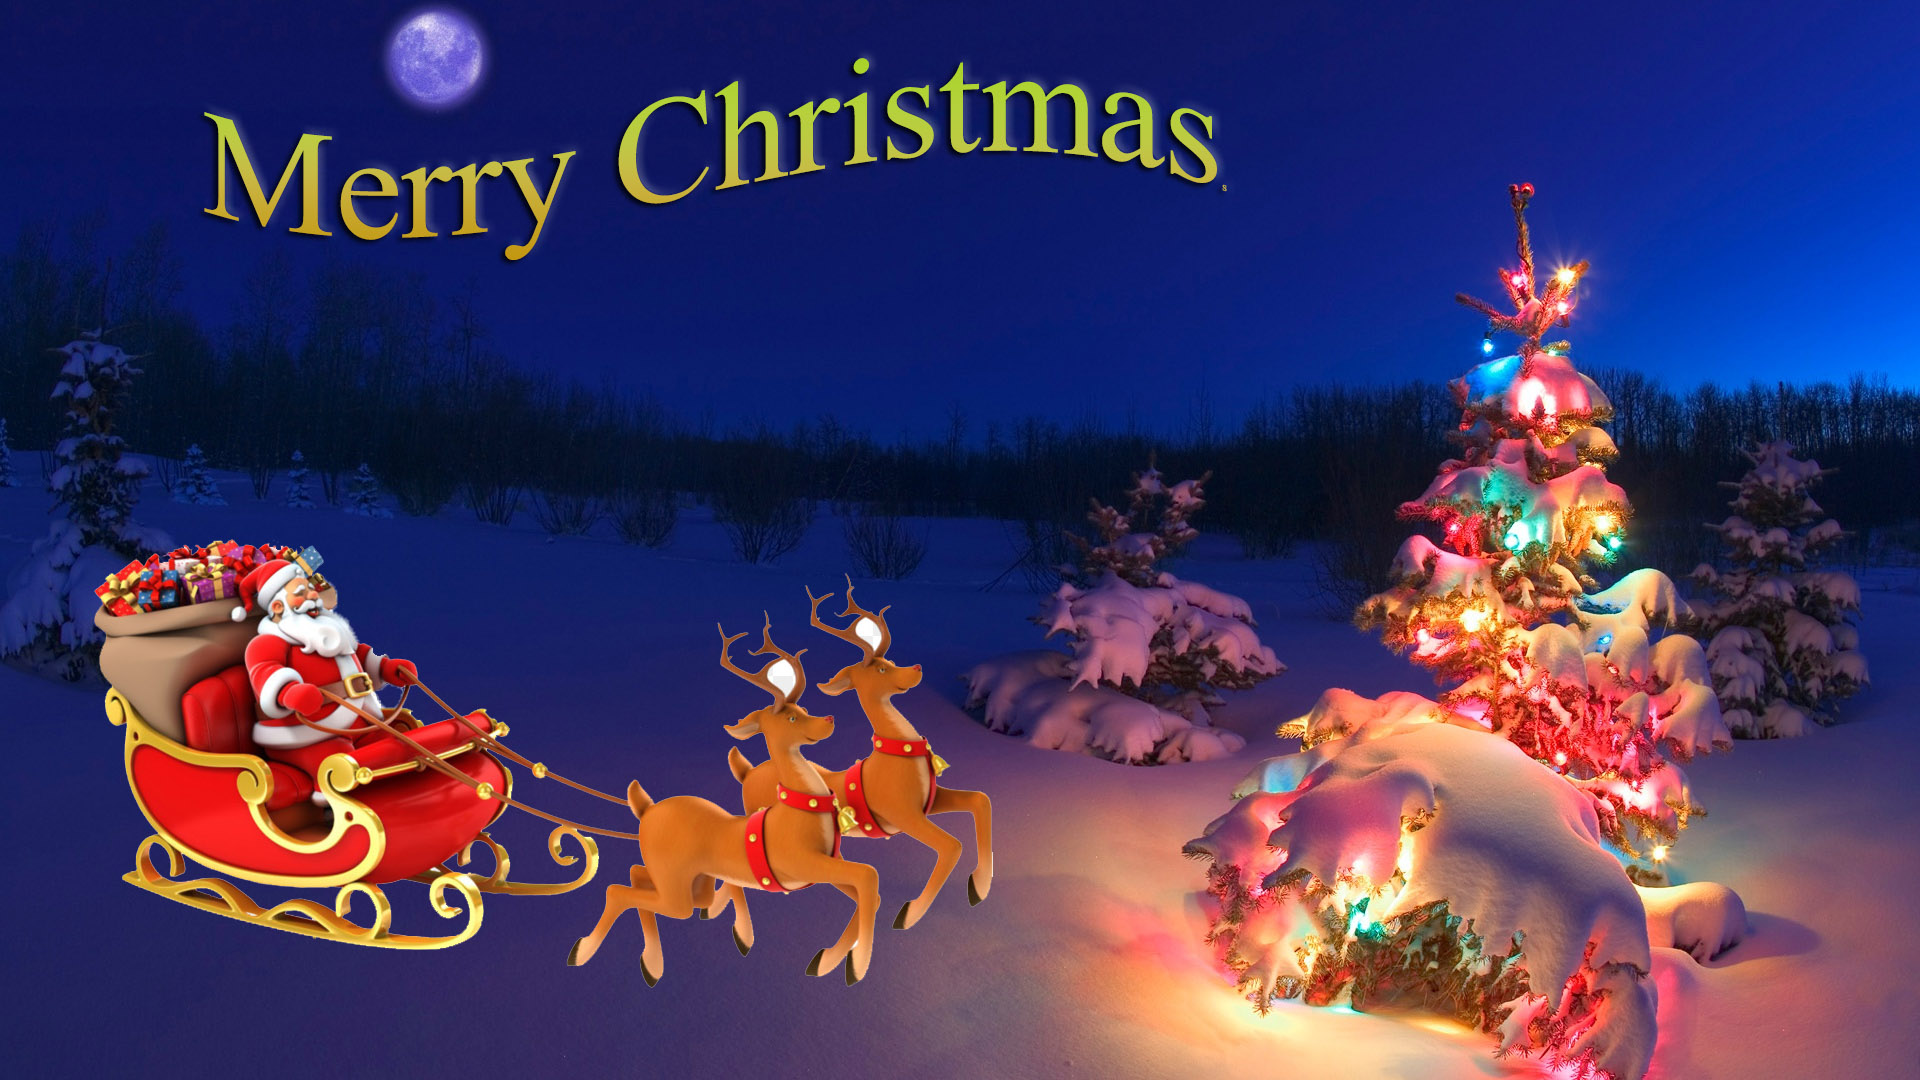 Images Of Santa Claus And Christmas Tree - God HD Wallpapers